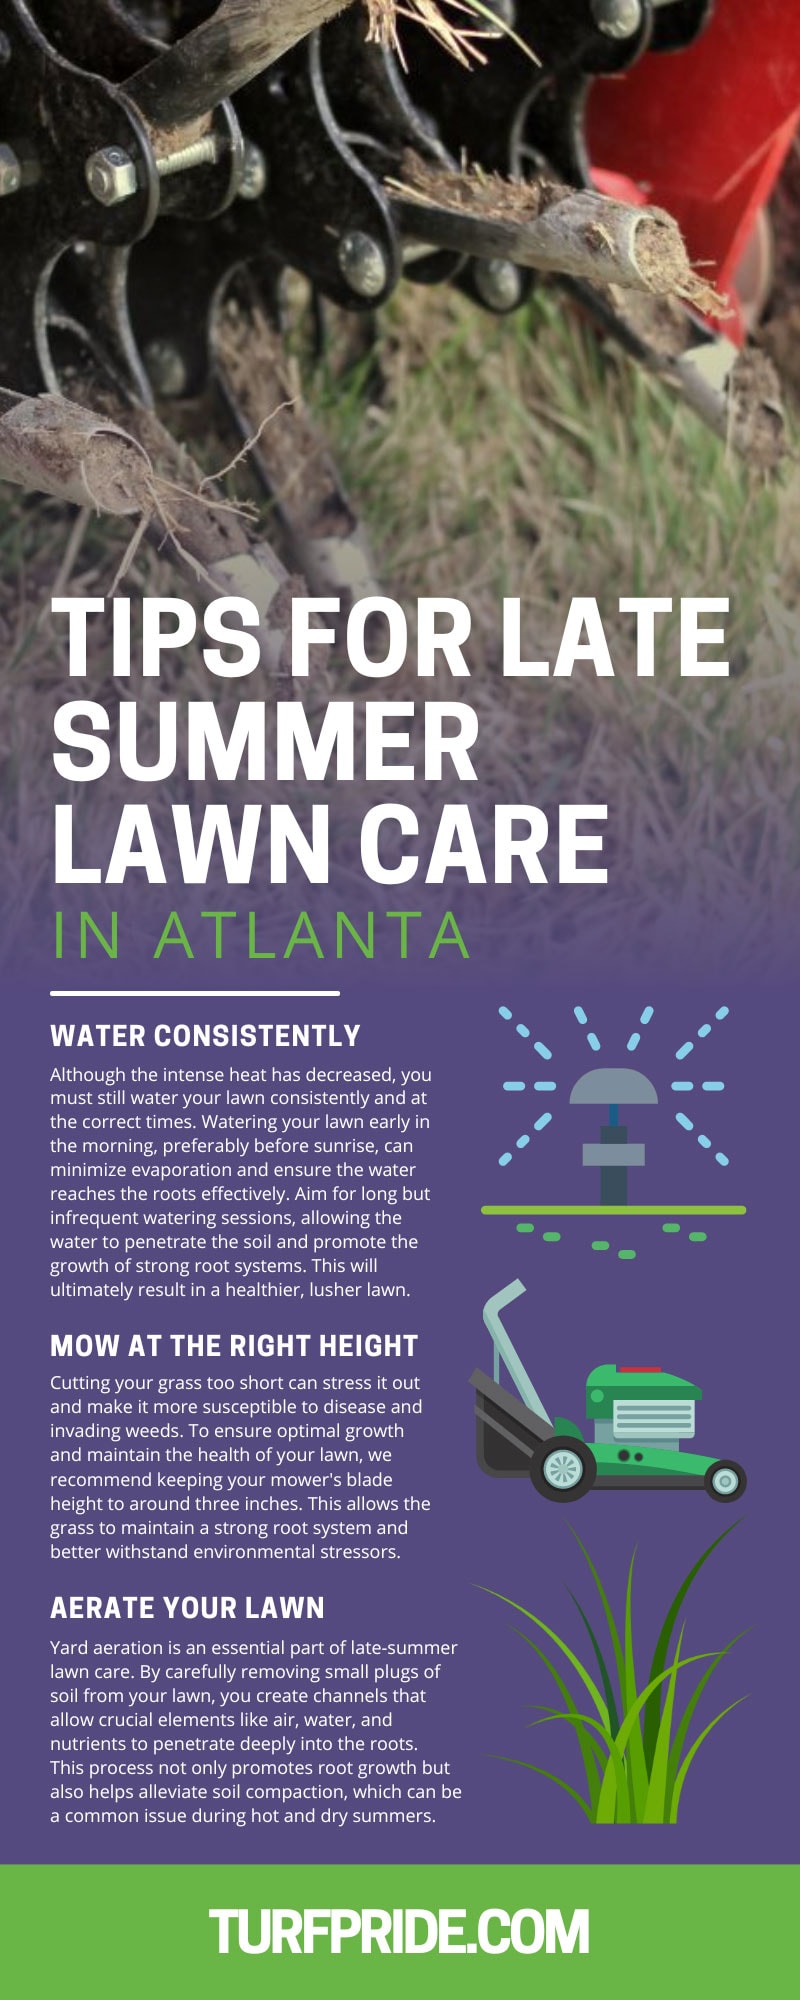 7 Tips for Late Summer Lawn Care in Atlanta